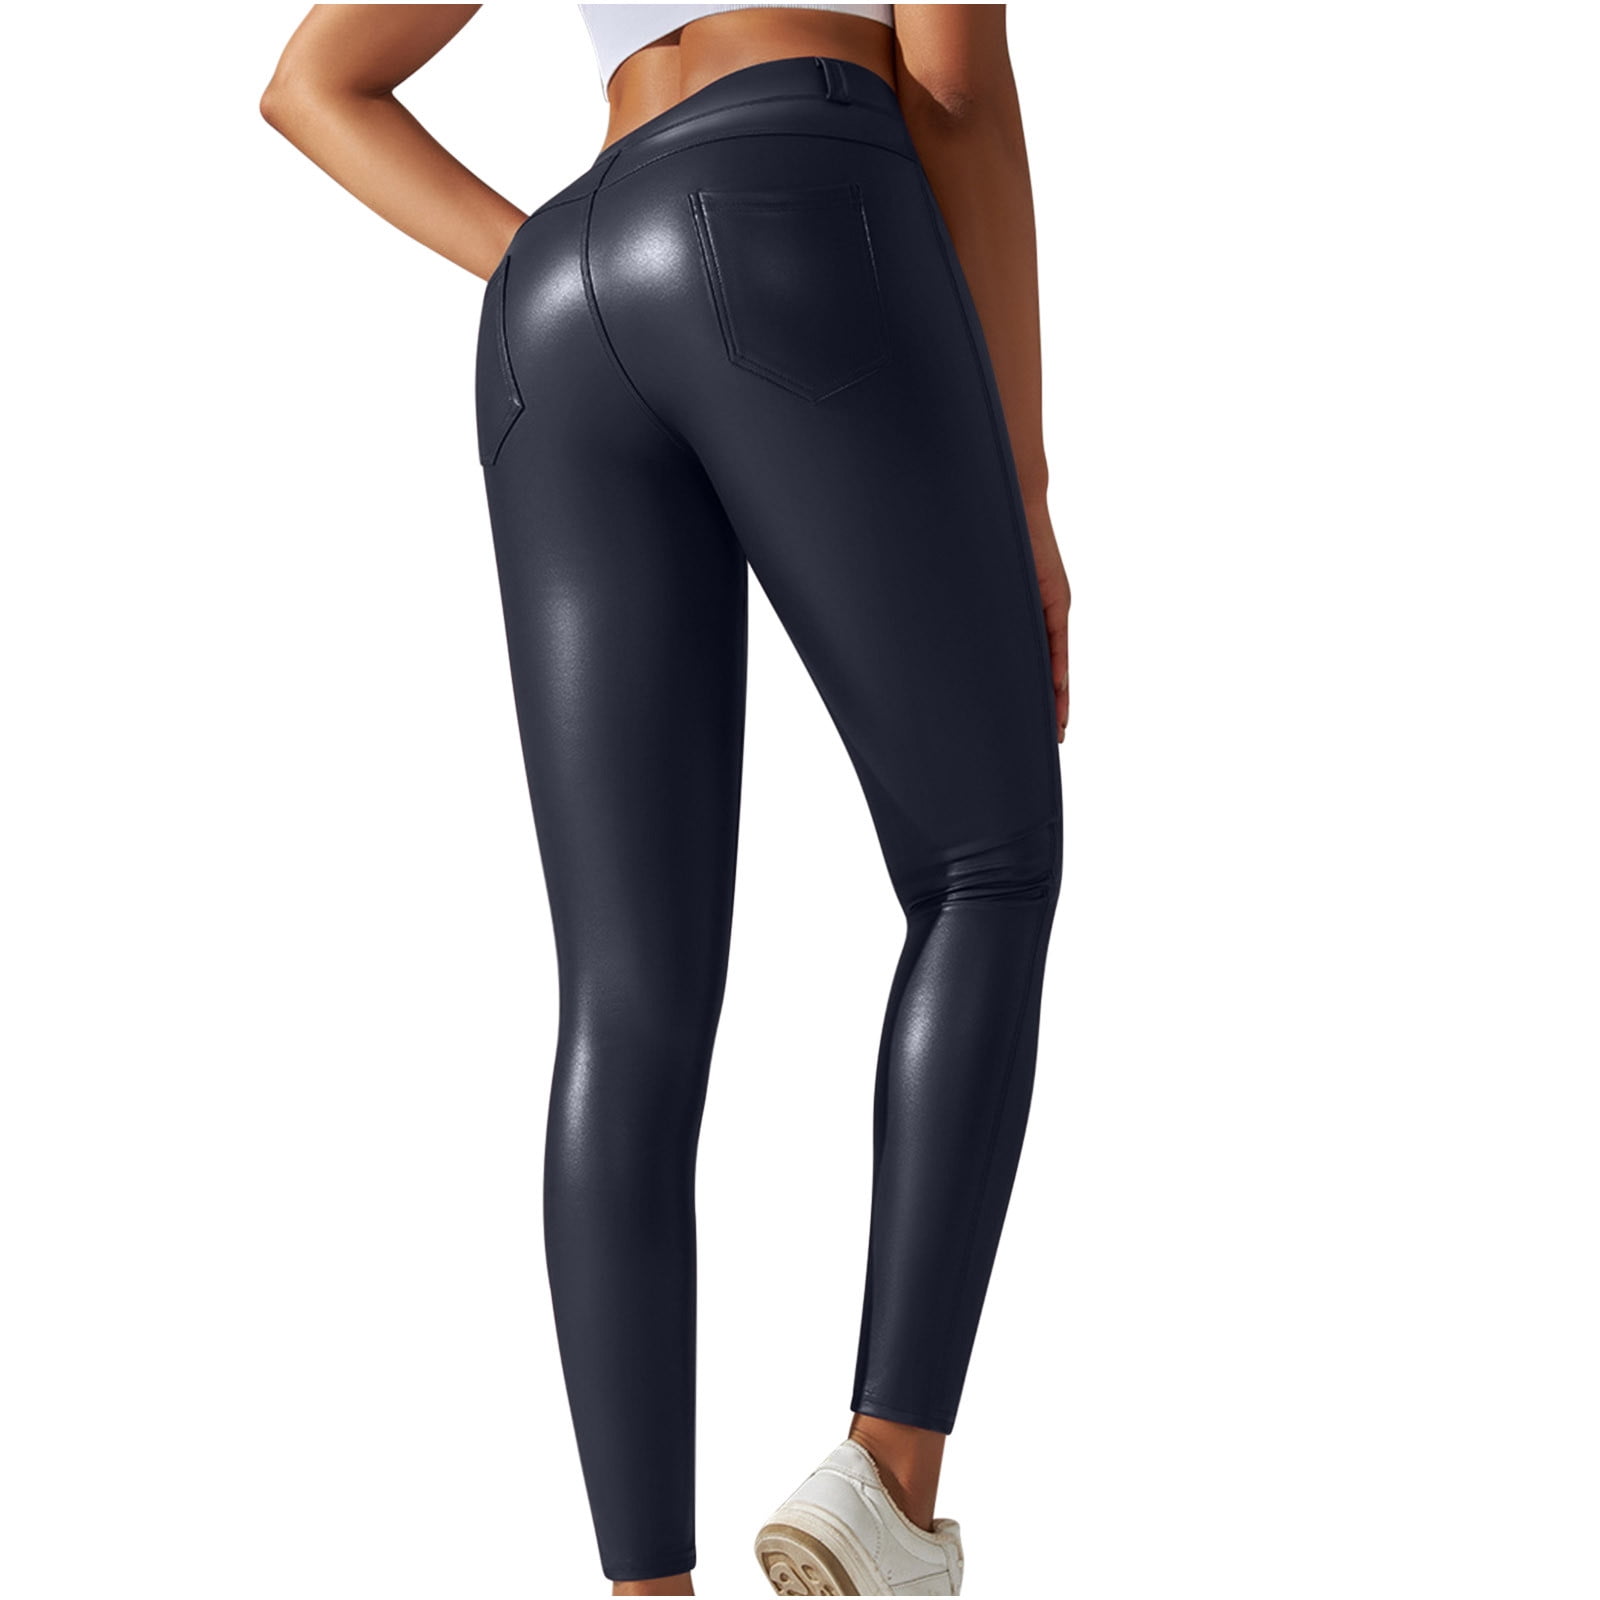 SMihono Skinny Slim Women's Sexy Leggings Plus Size Color Bottom Small Feet  Sports High Waist Thin Leather Pants Full Length Athletic Sports Pants for Teen  Girls Love Navy 6 